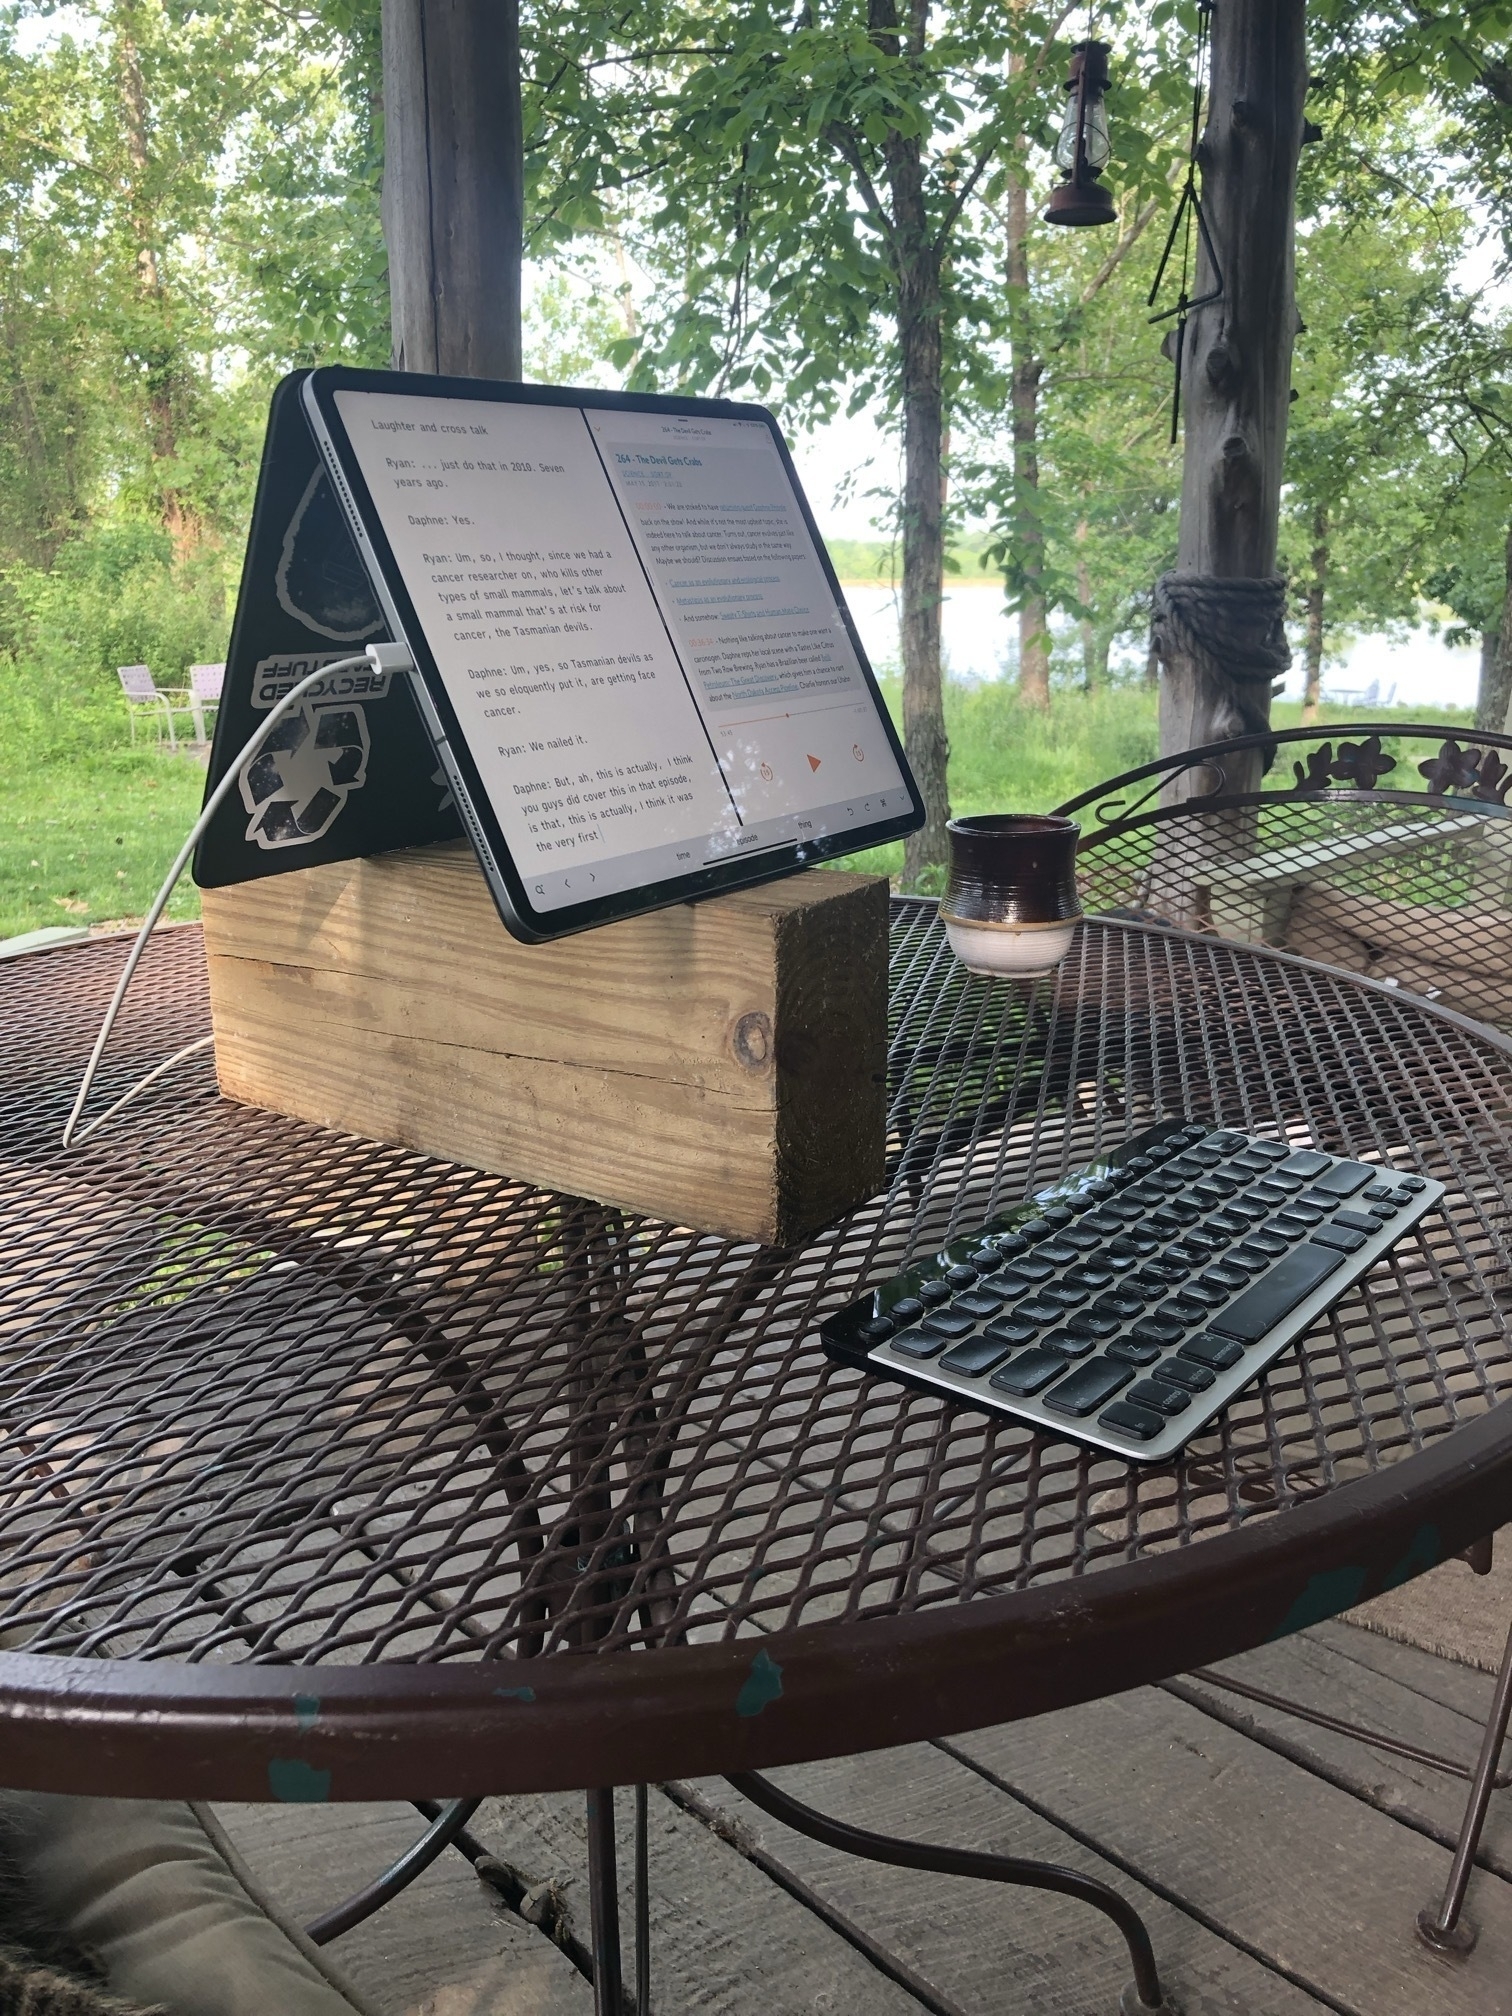 An iPad Pro in a Smart Keyboard Folio is arranged in a sort of A-Frame and is resting on a large wood block elevating it to eye height. The arrangement is an a metal table sitting on a porch. A keyboard sits in front of it.